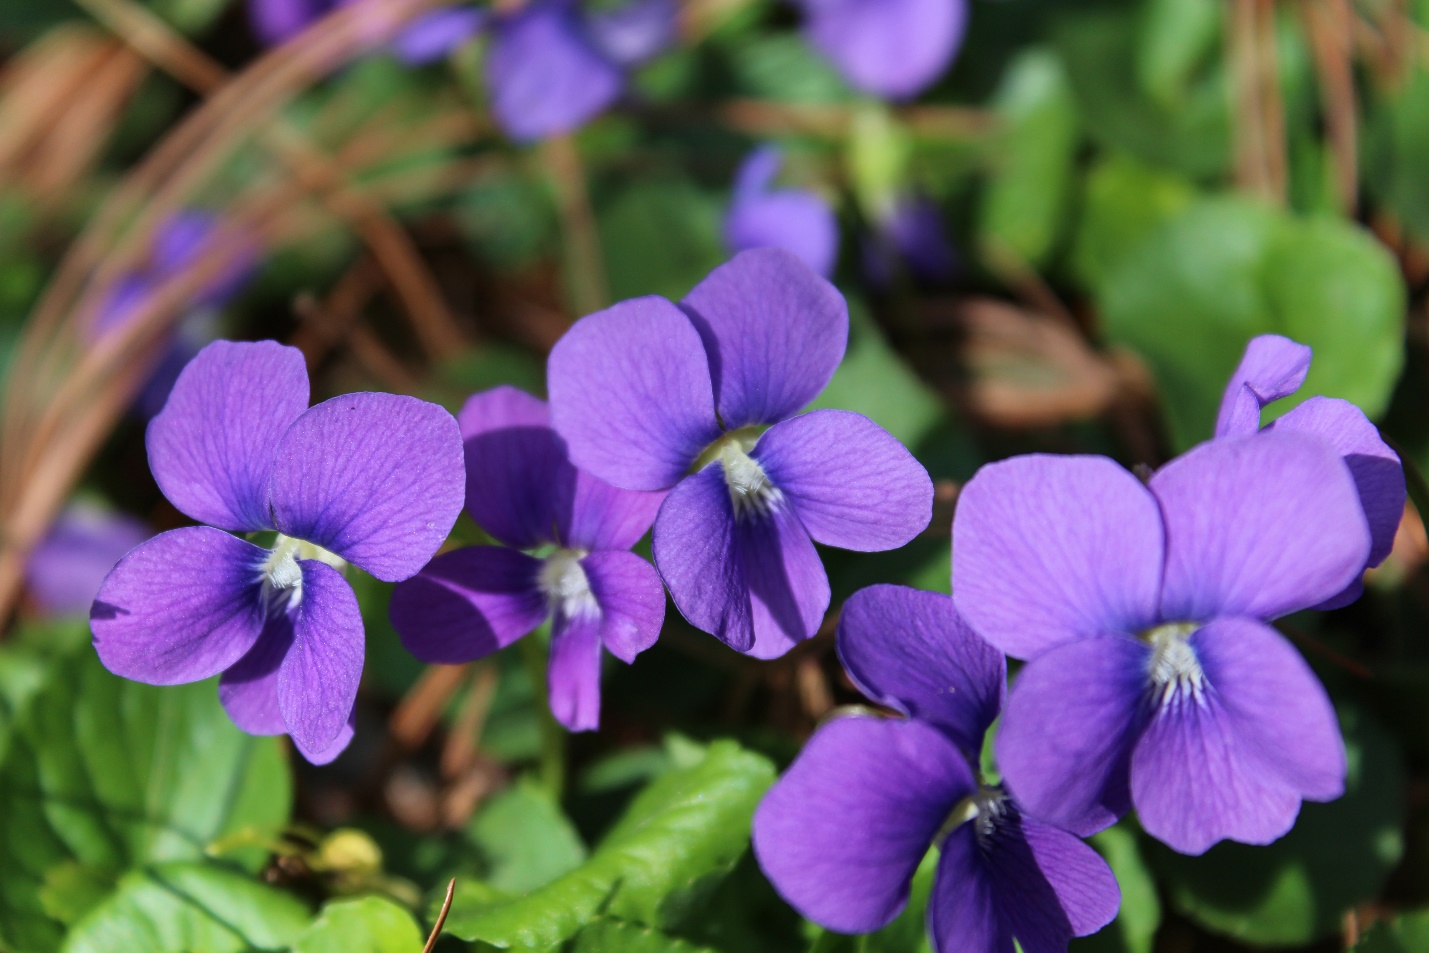 How to Grow and Care for Wild Violets?